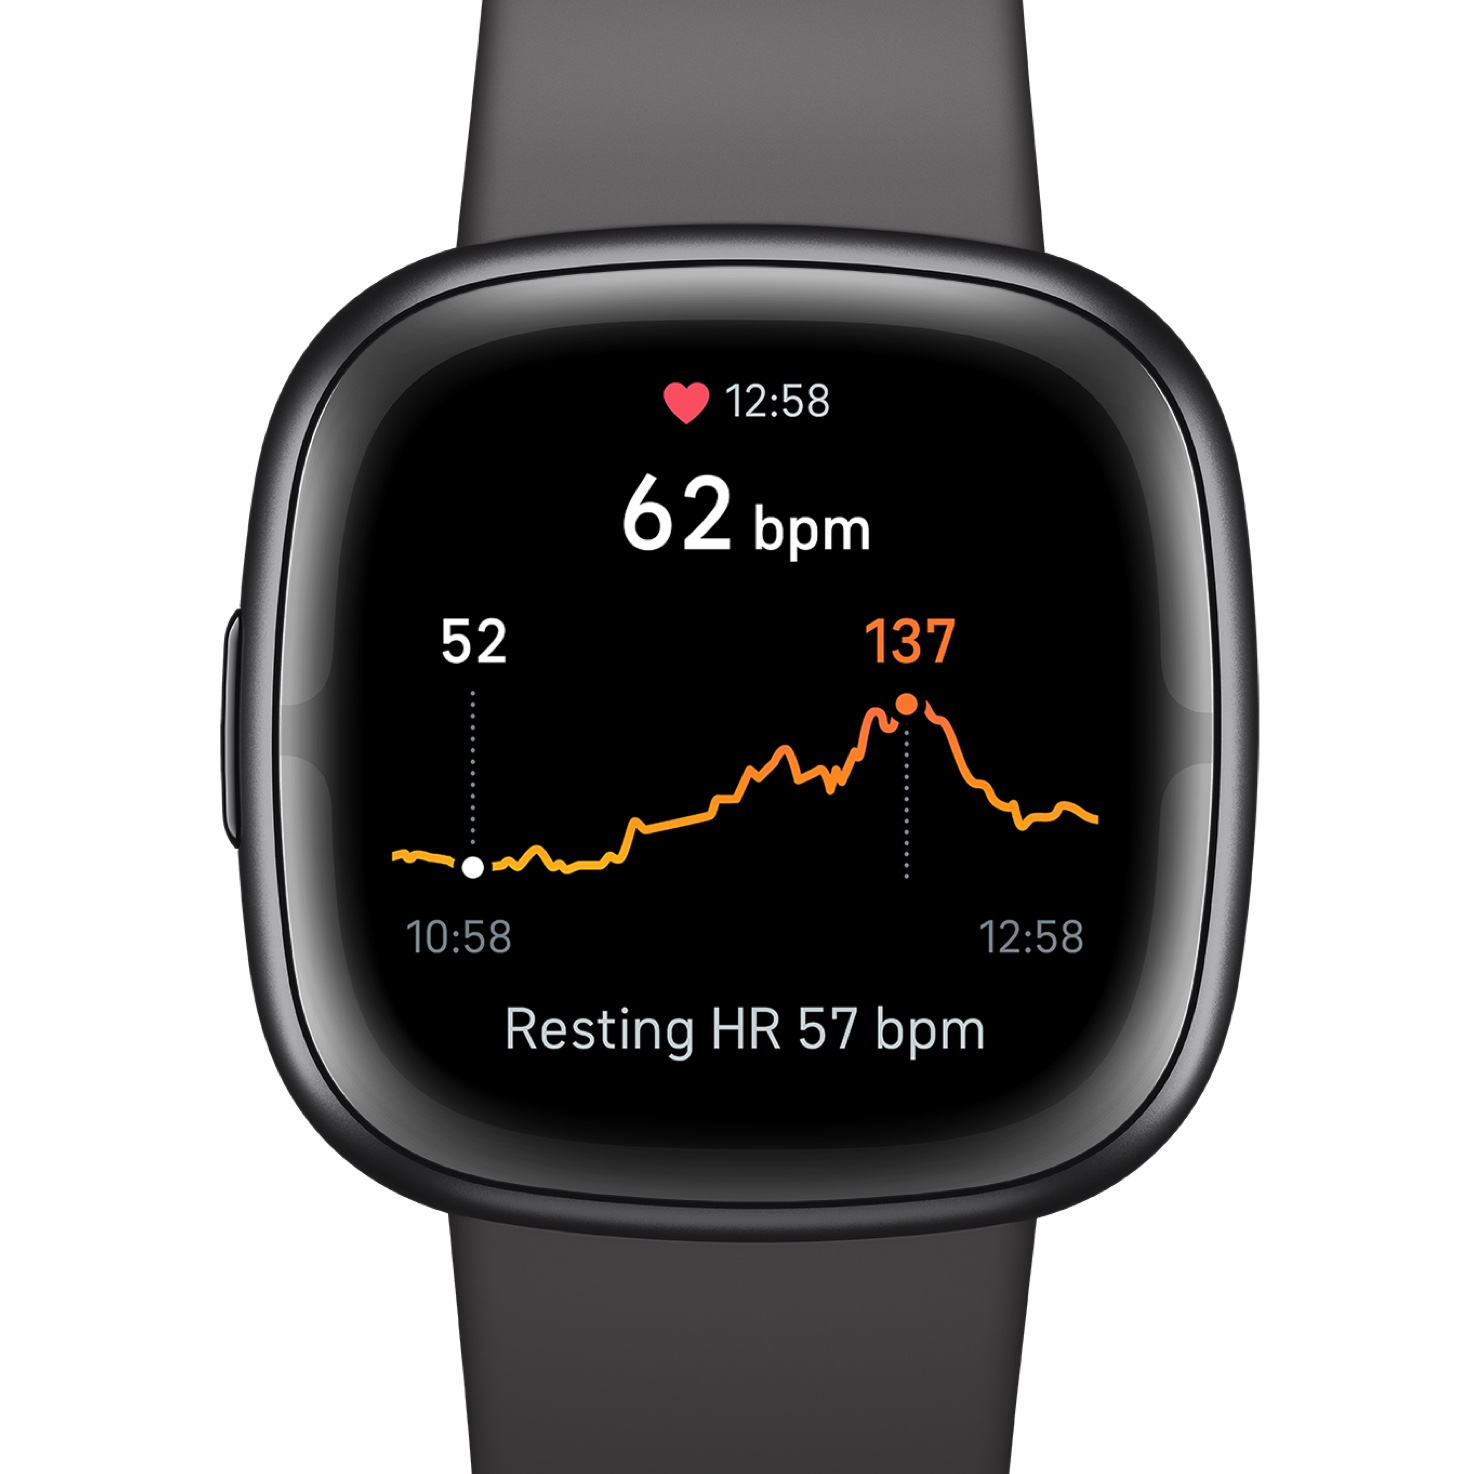 Fitness Tracker with Heart Rate